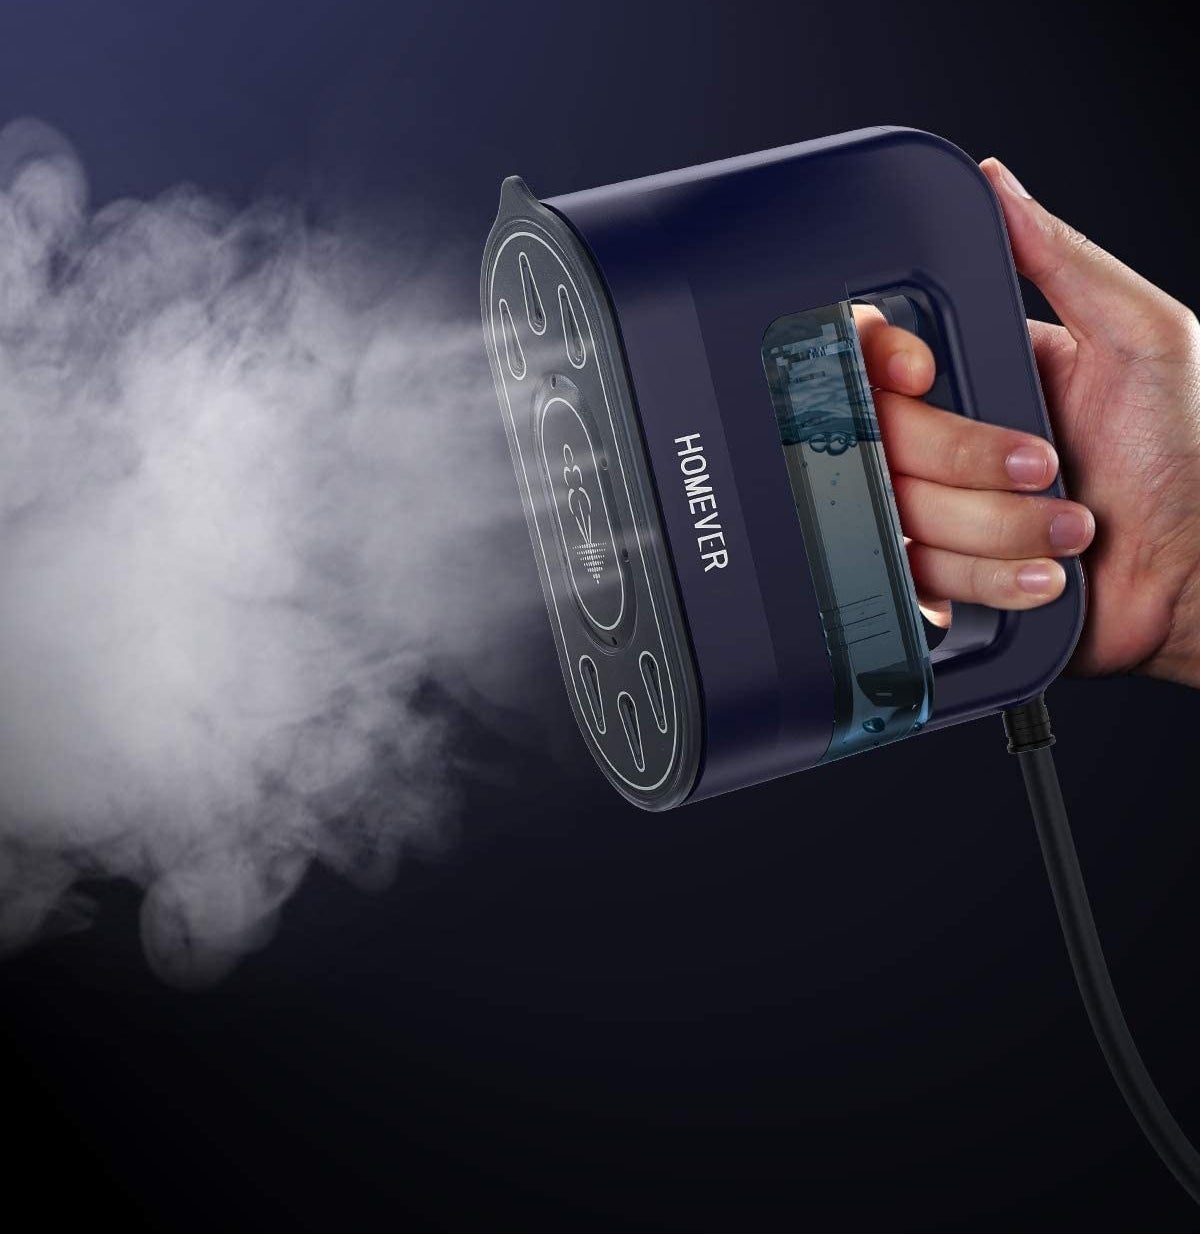 A person holding the handheld steamer while it blows out steam